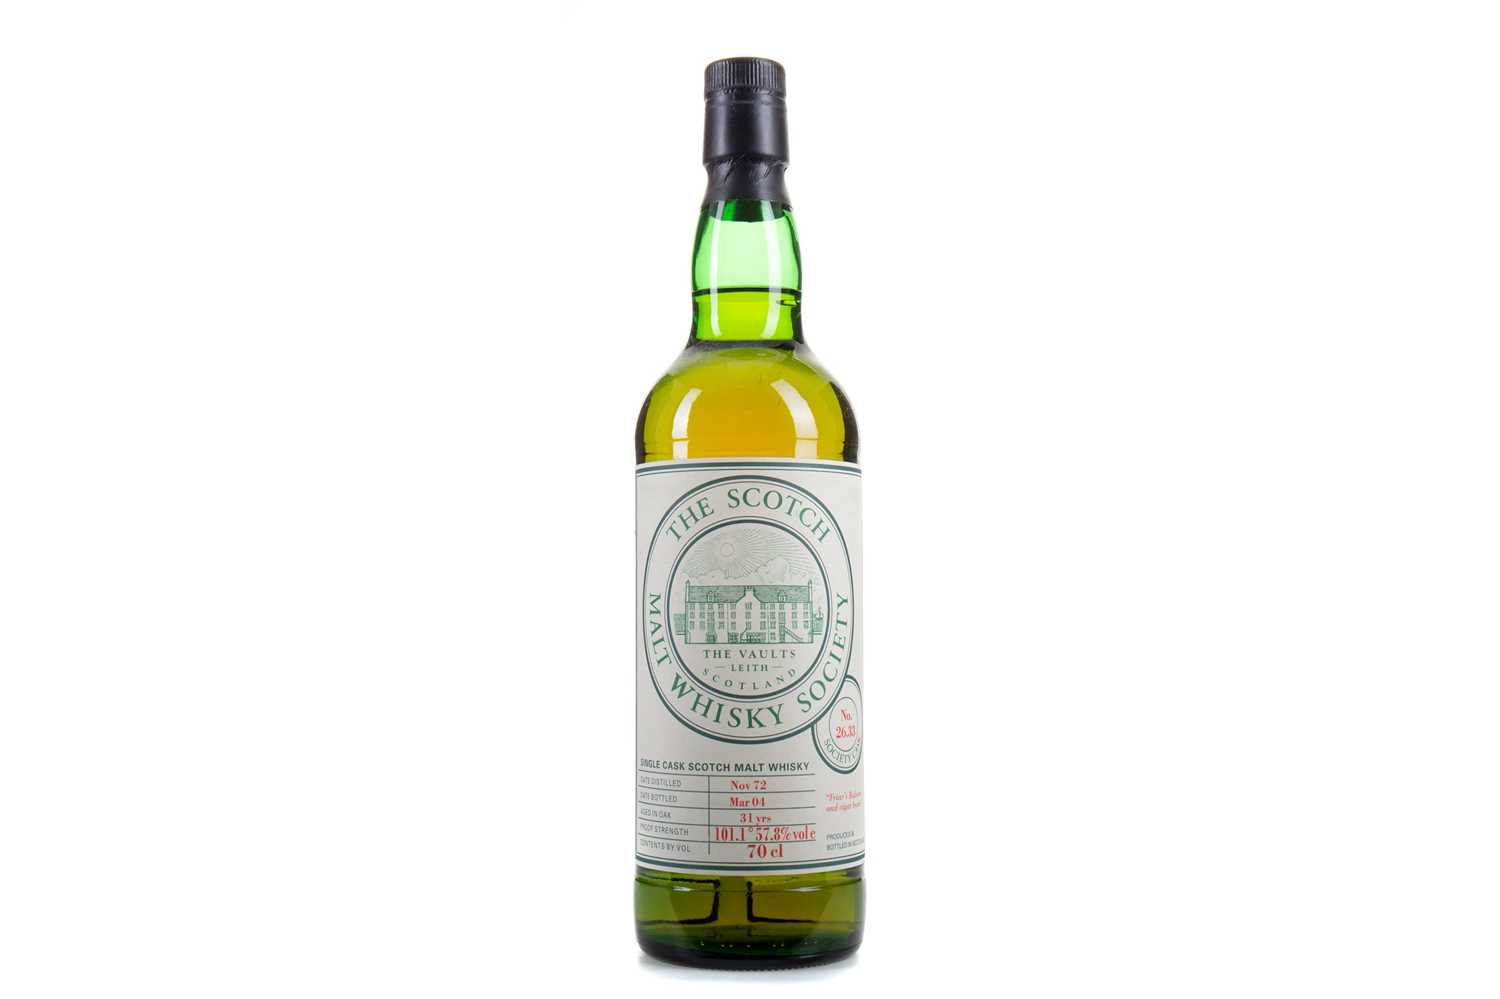 Lot 611 - SMWS 26.33 CLYNELISH 1972 31 YEAR OLD